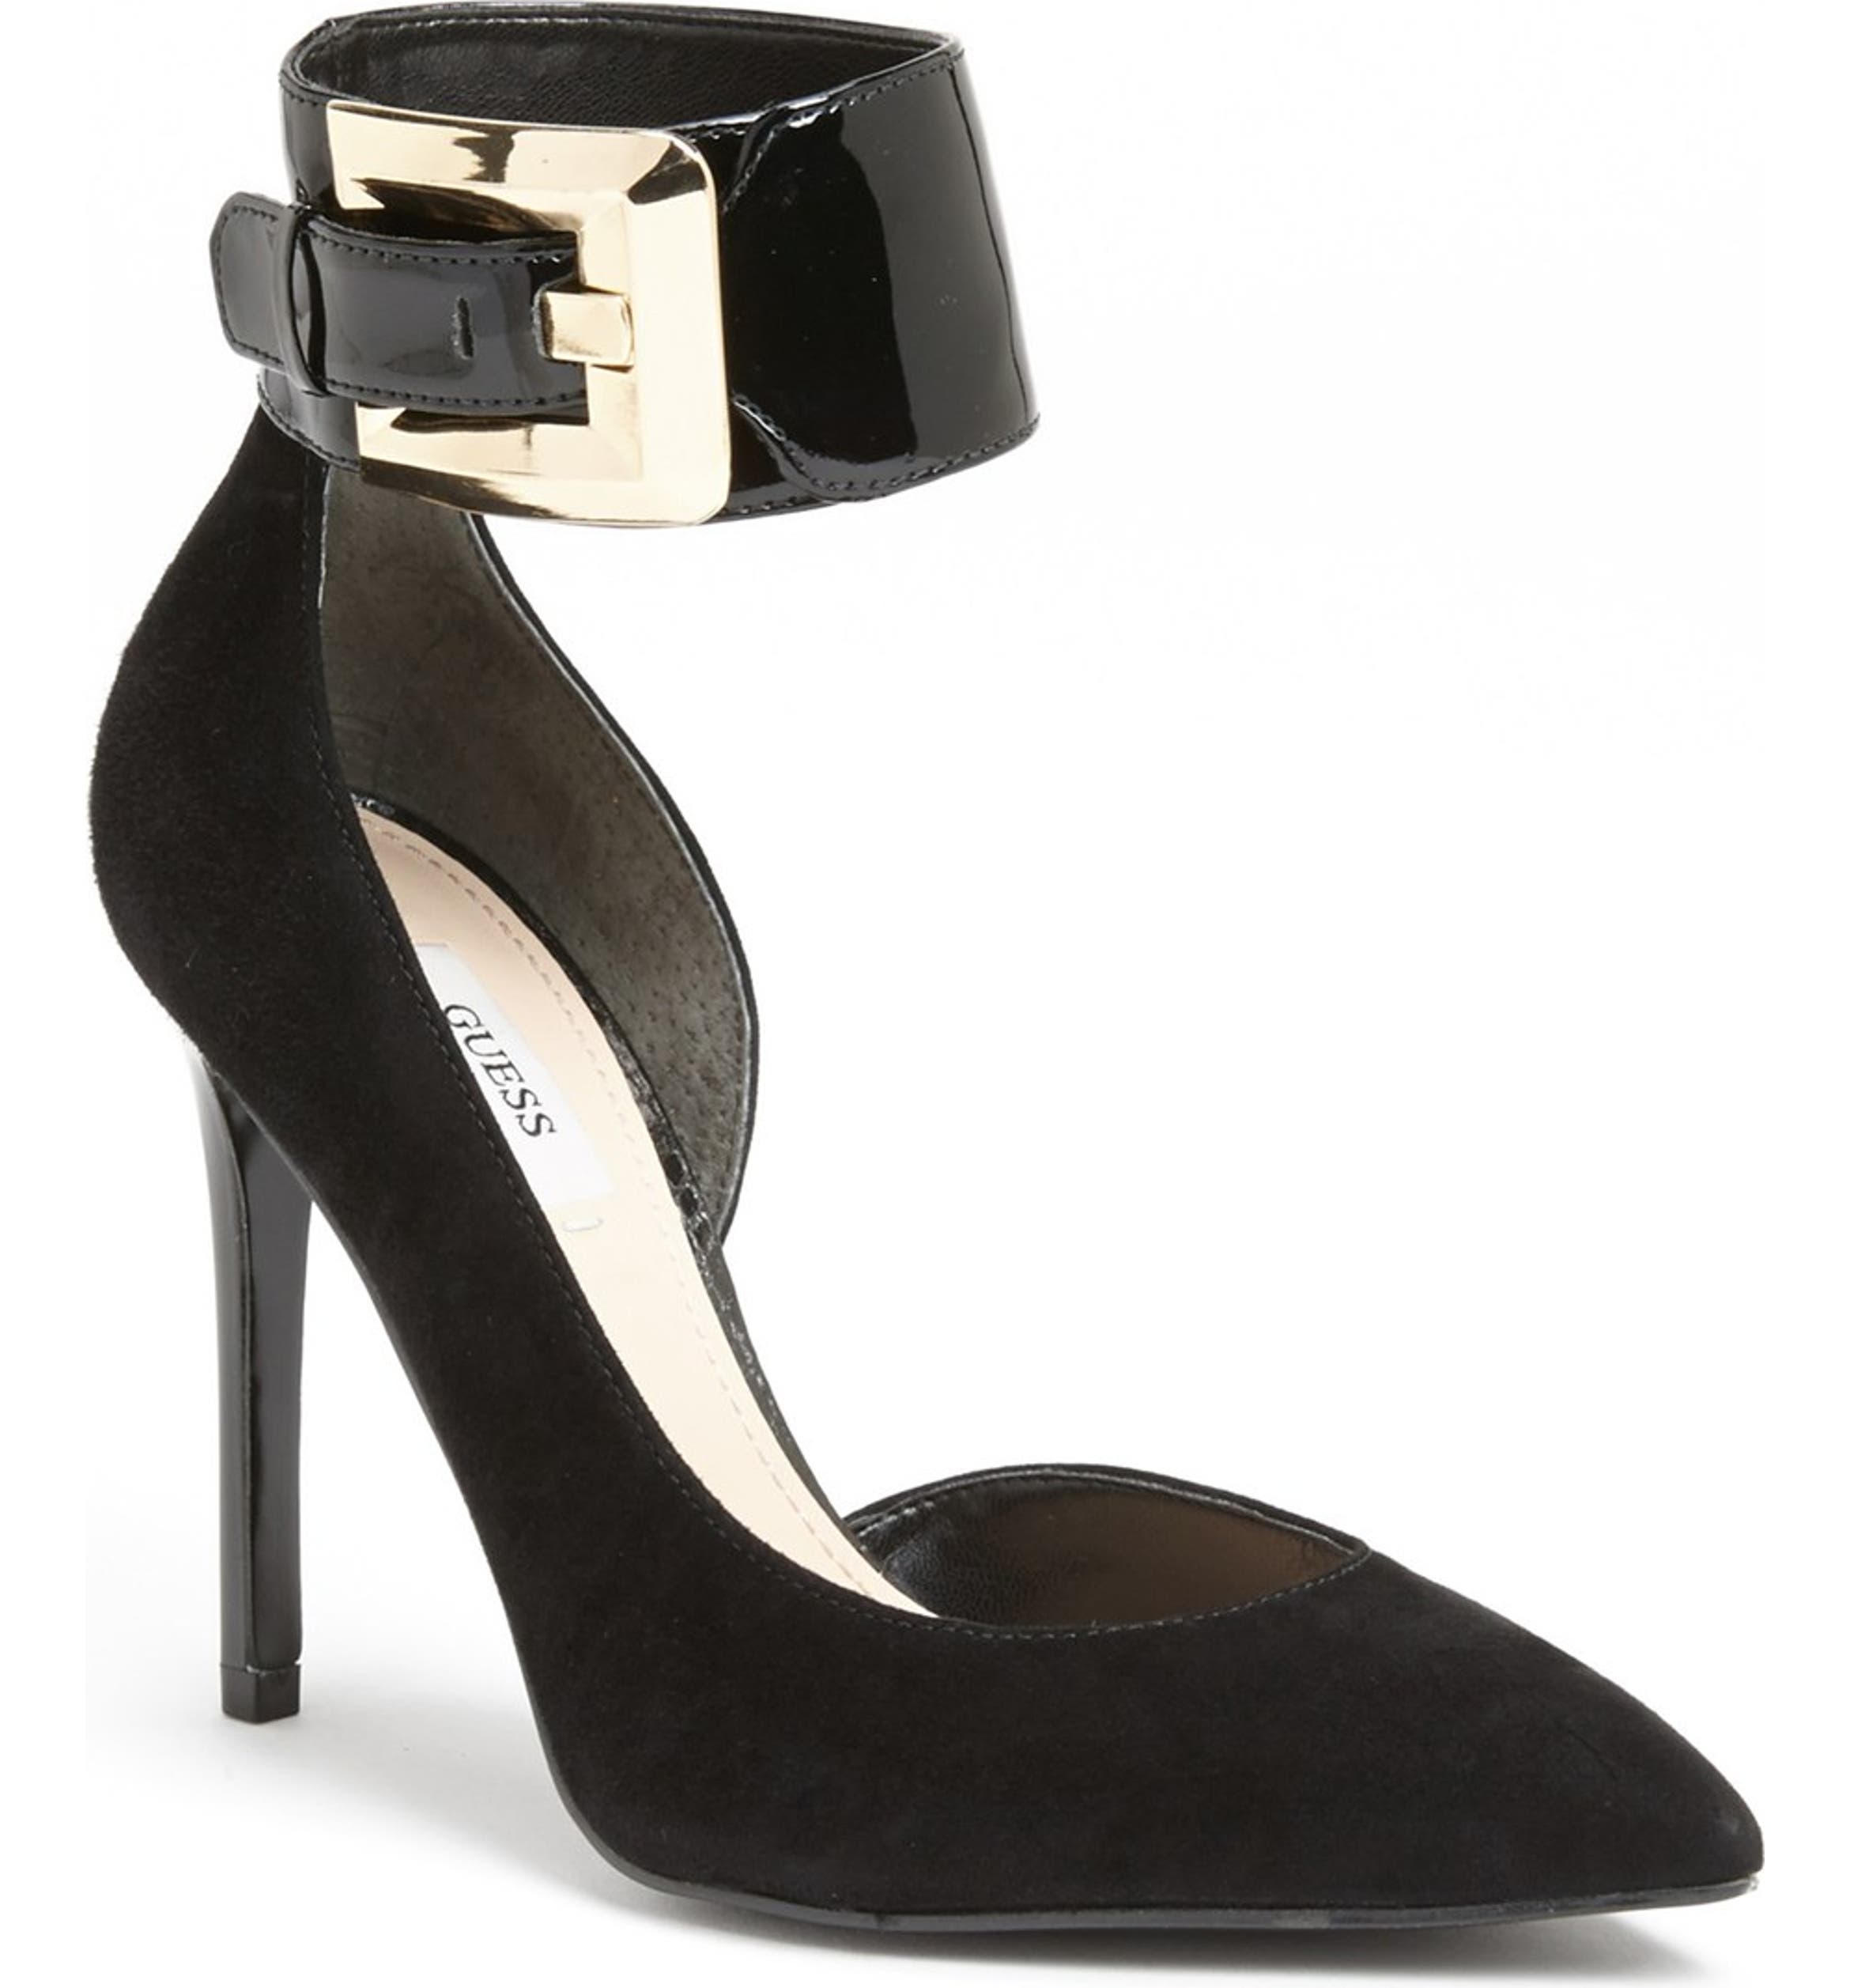 GUESS 'Adal' Ankle Strap d'Orsay Pump | Nordstrom